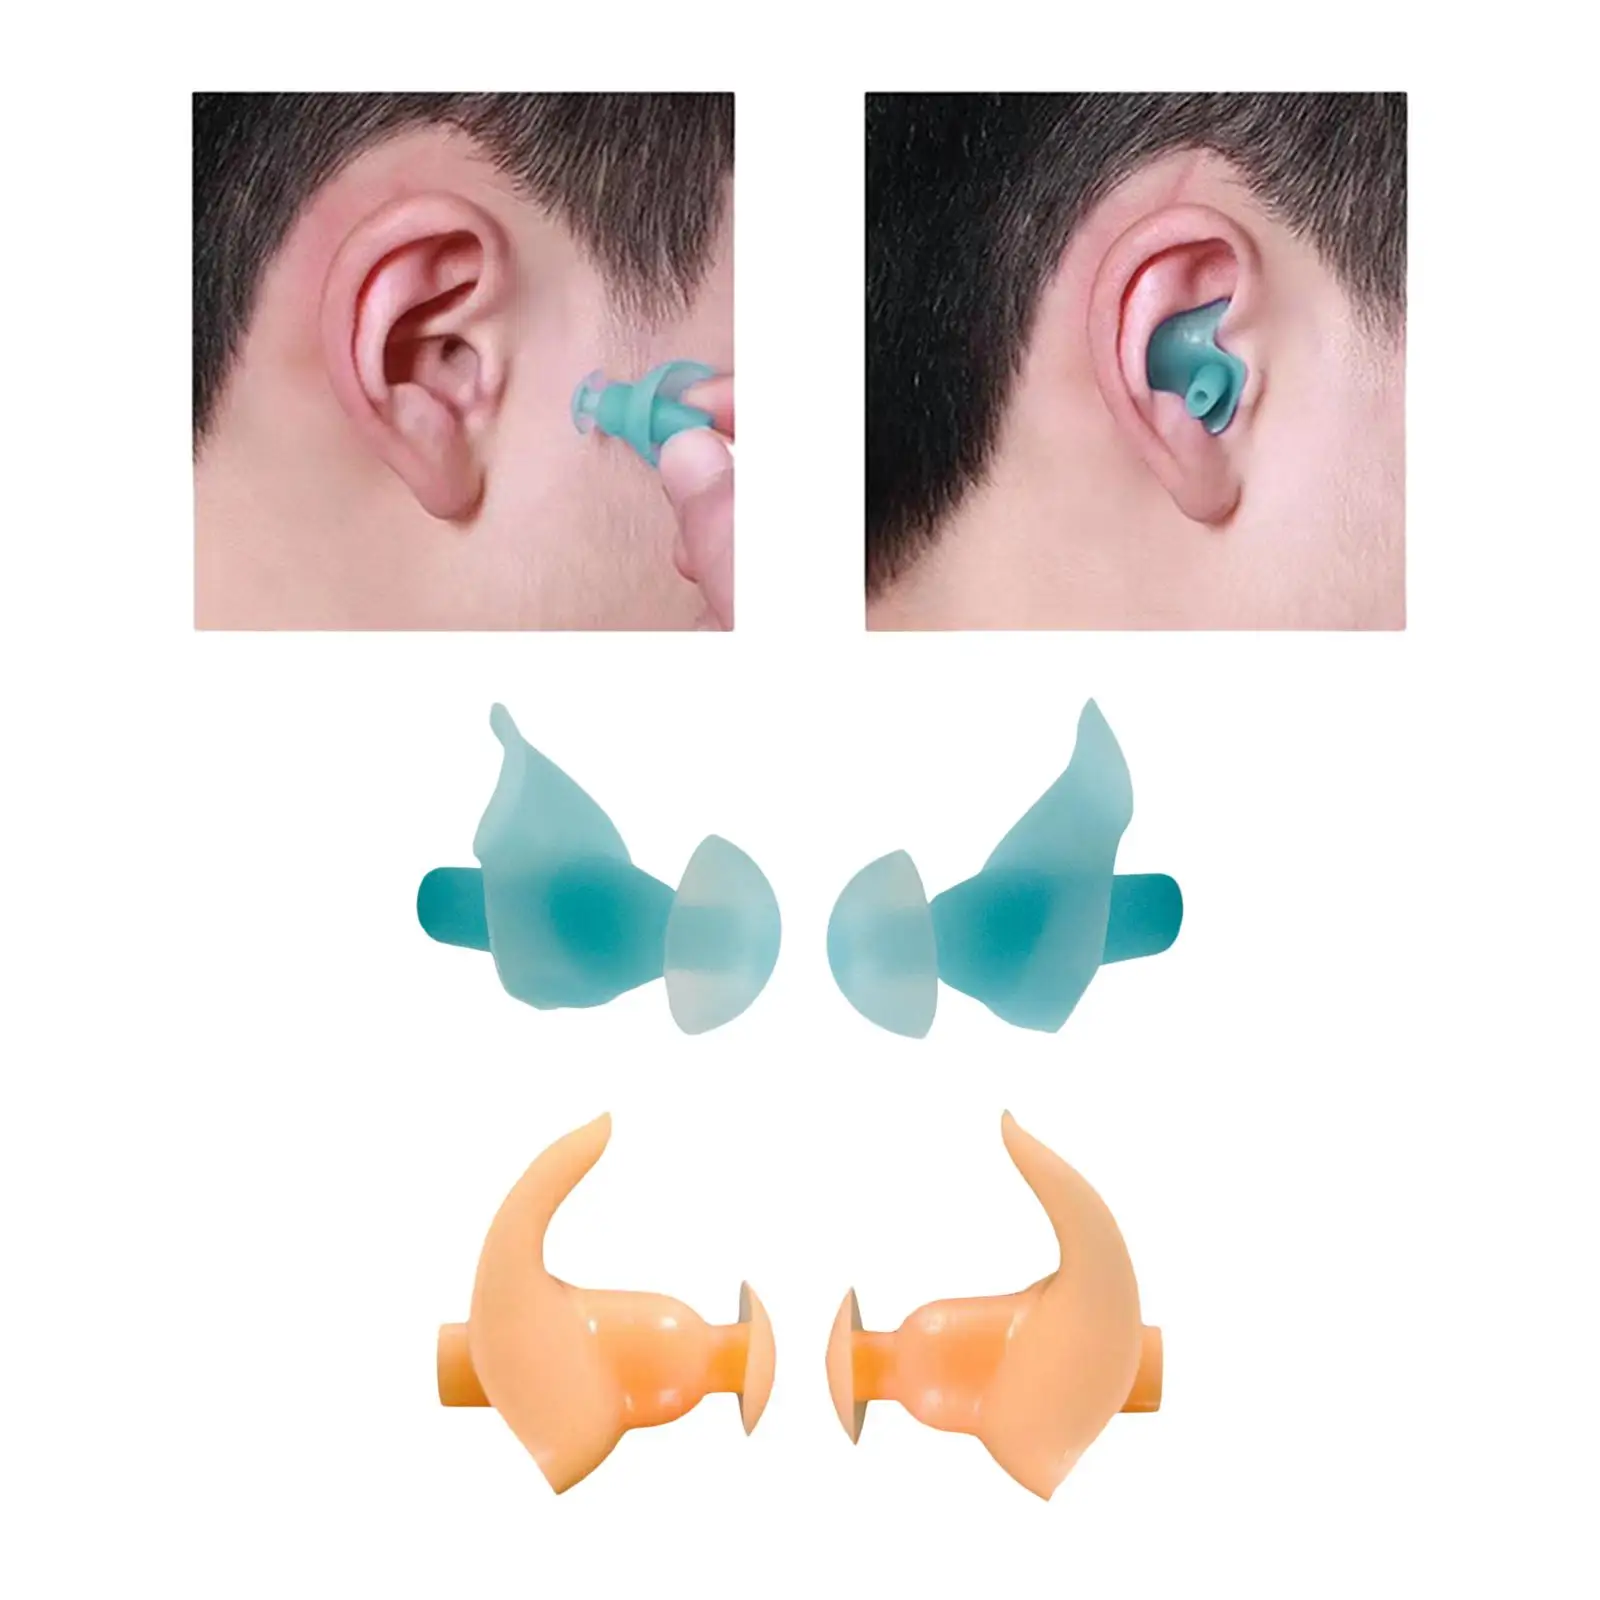 Soft Silicone Earplugs Swimming Waterproof Protective Noise Reduction Swim Earbuds for Bath Tourism Shower Outdoor Water Sports